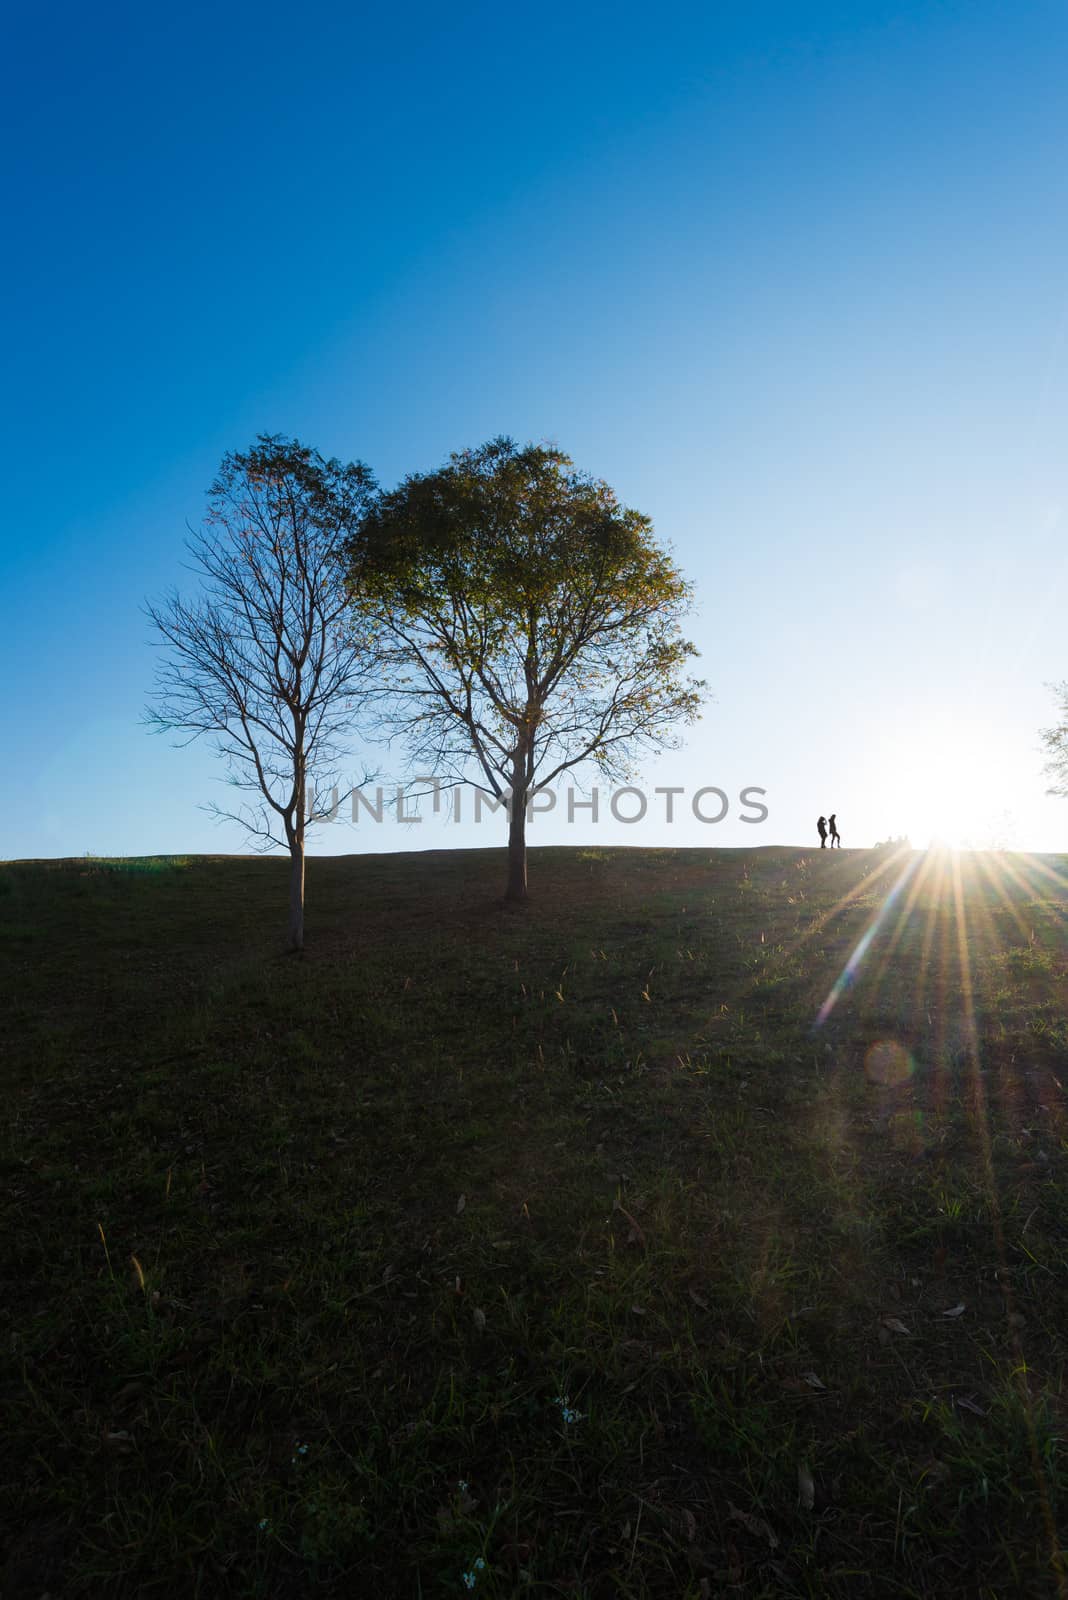 silhouette of people and tree  on hill with sunrise and lens flare effect